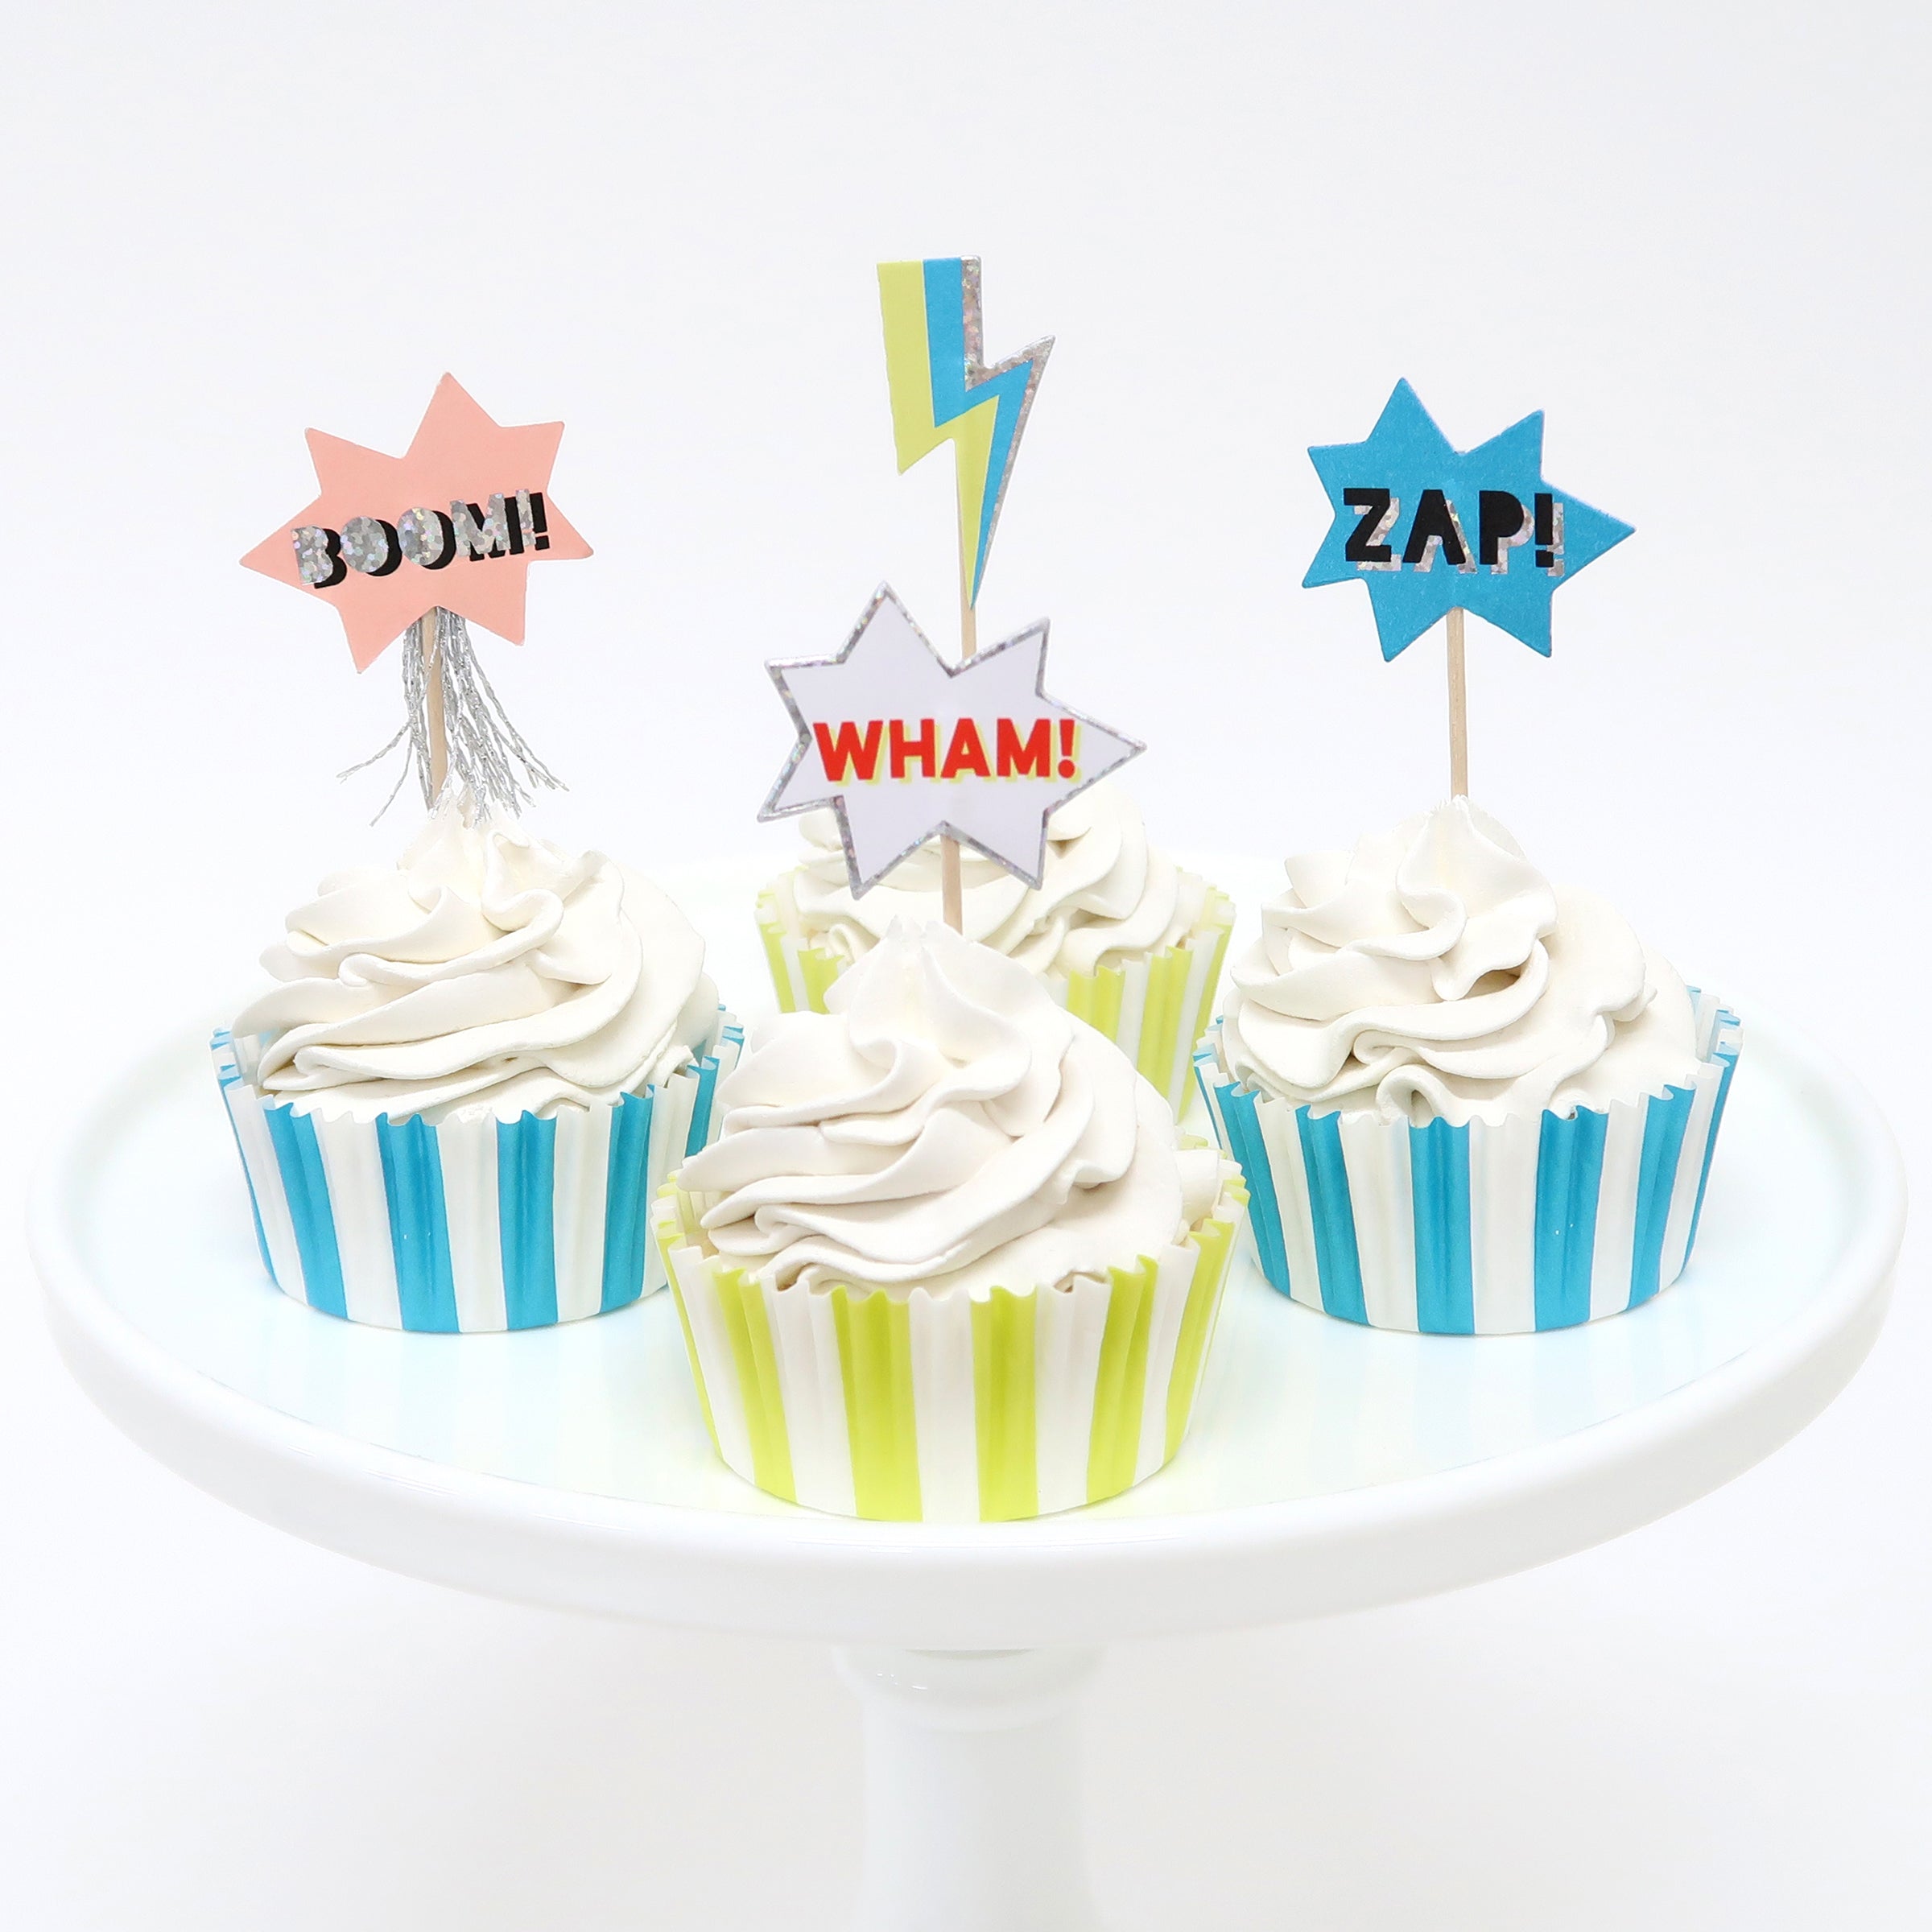 Make special birthday cupcakes with our kit , including cupcake cases and cake toppers, designed for a superhero party.